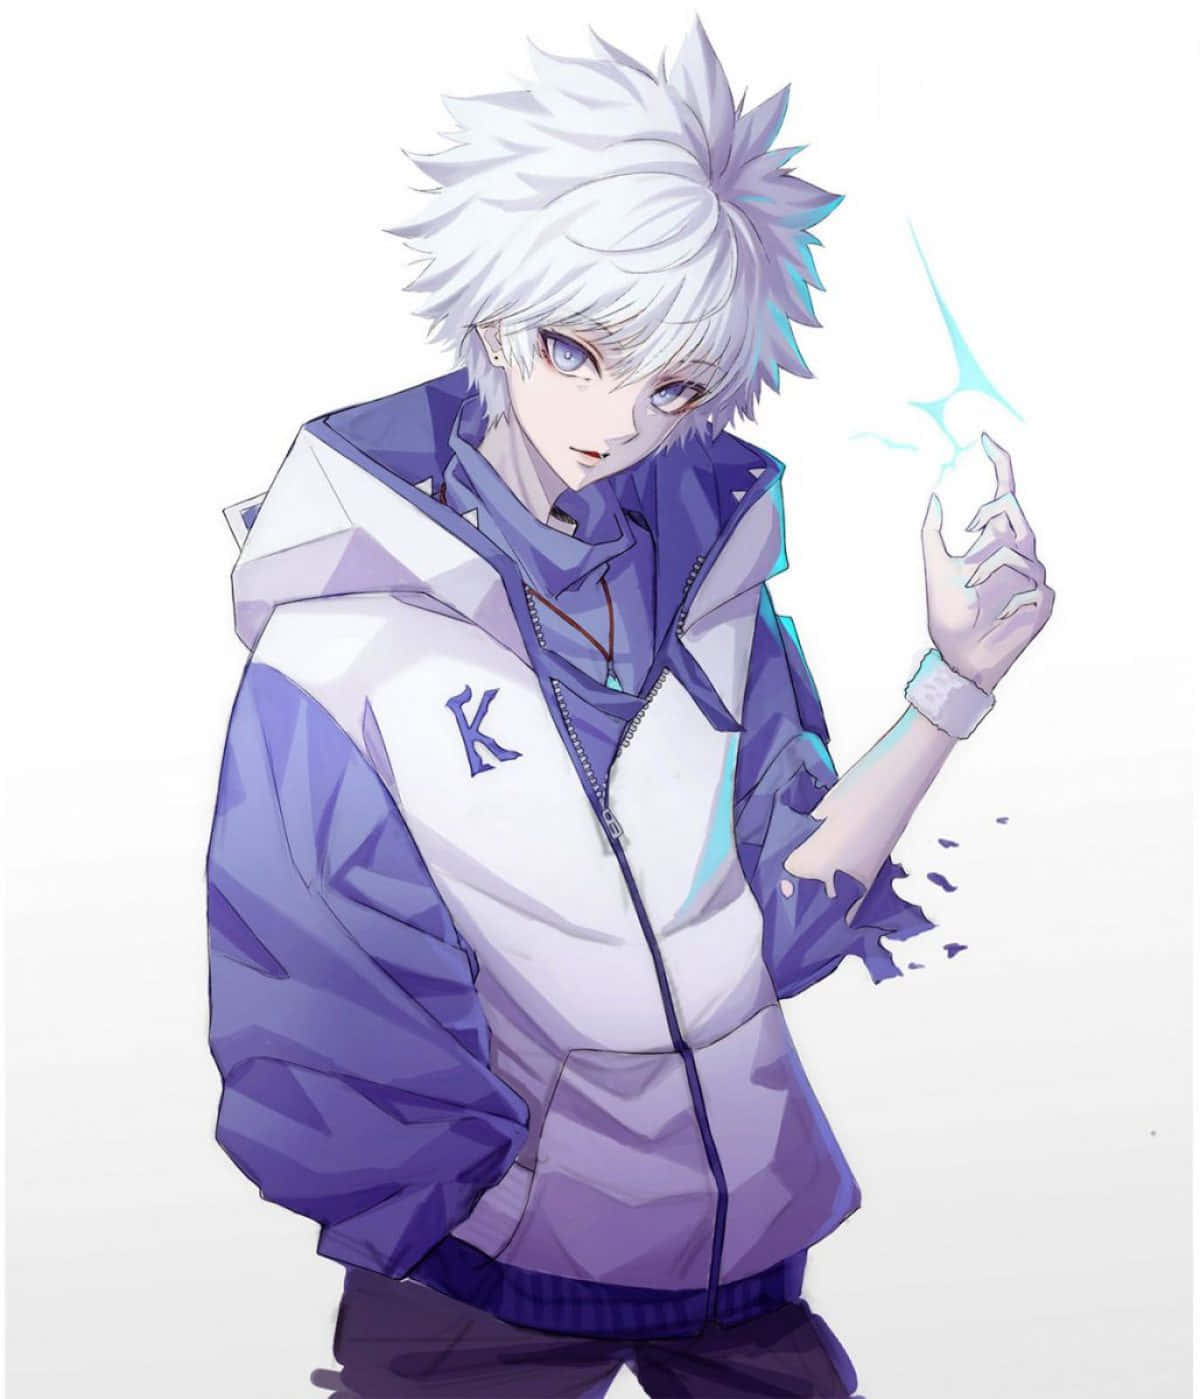 The young Killua stands strong in the face of adversity.